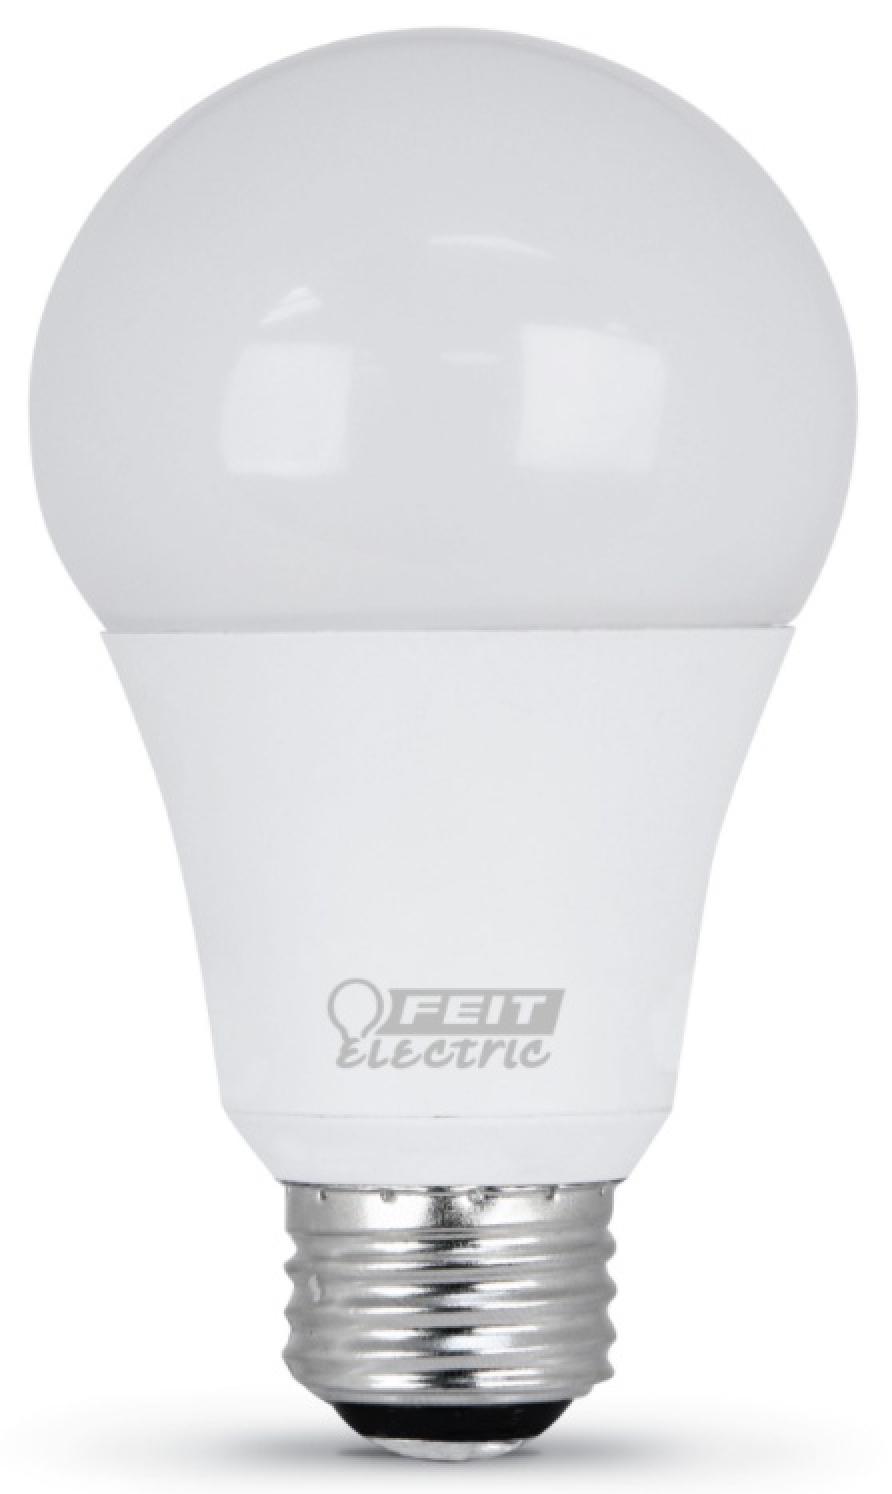 Feit Electric LED 50/100/150 Watt Equivalent 3-Way Non-Dimmable Light Bulb 